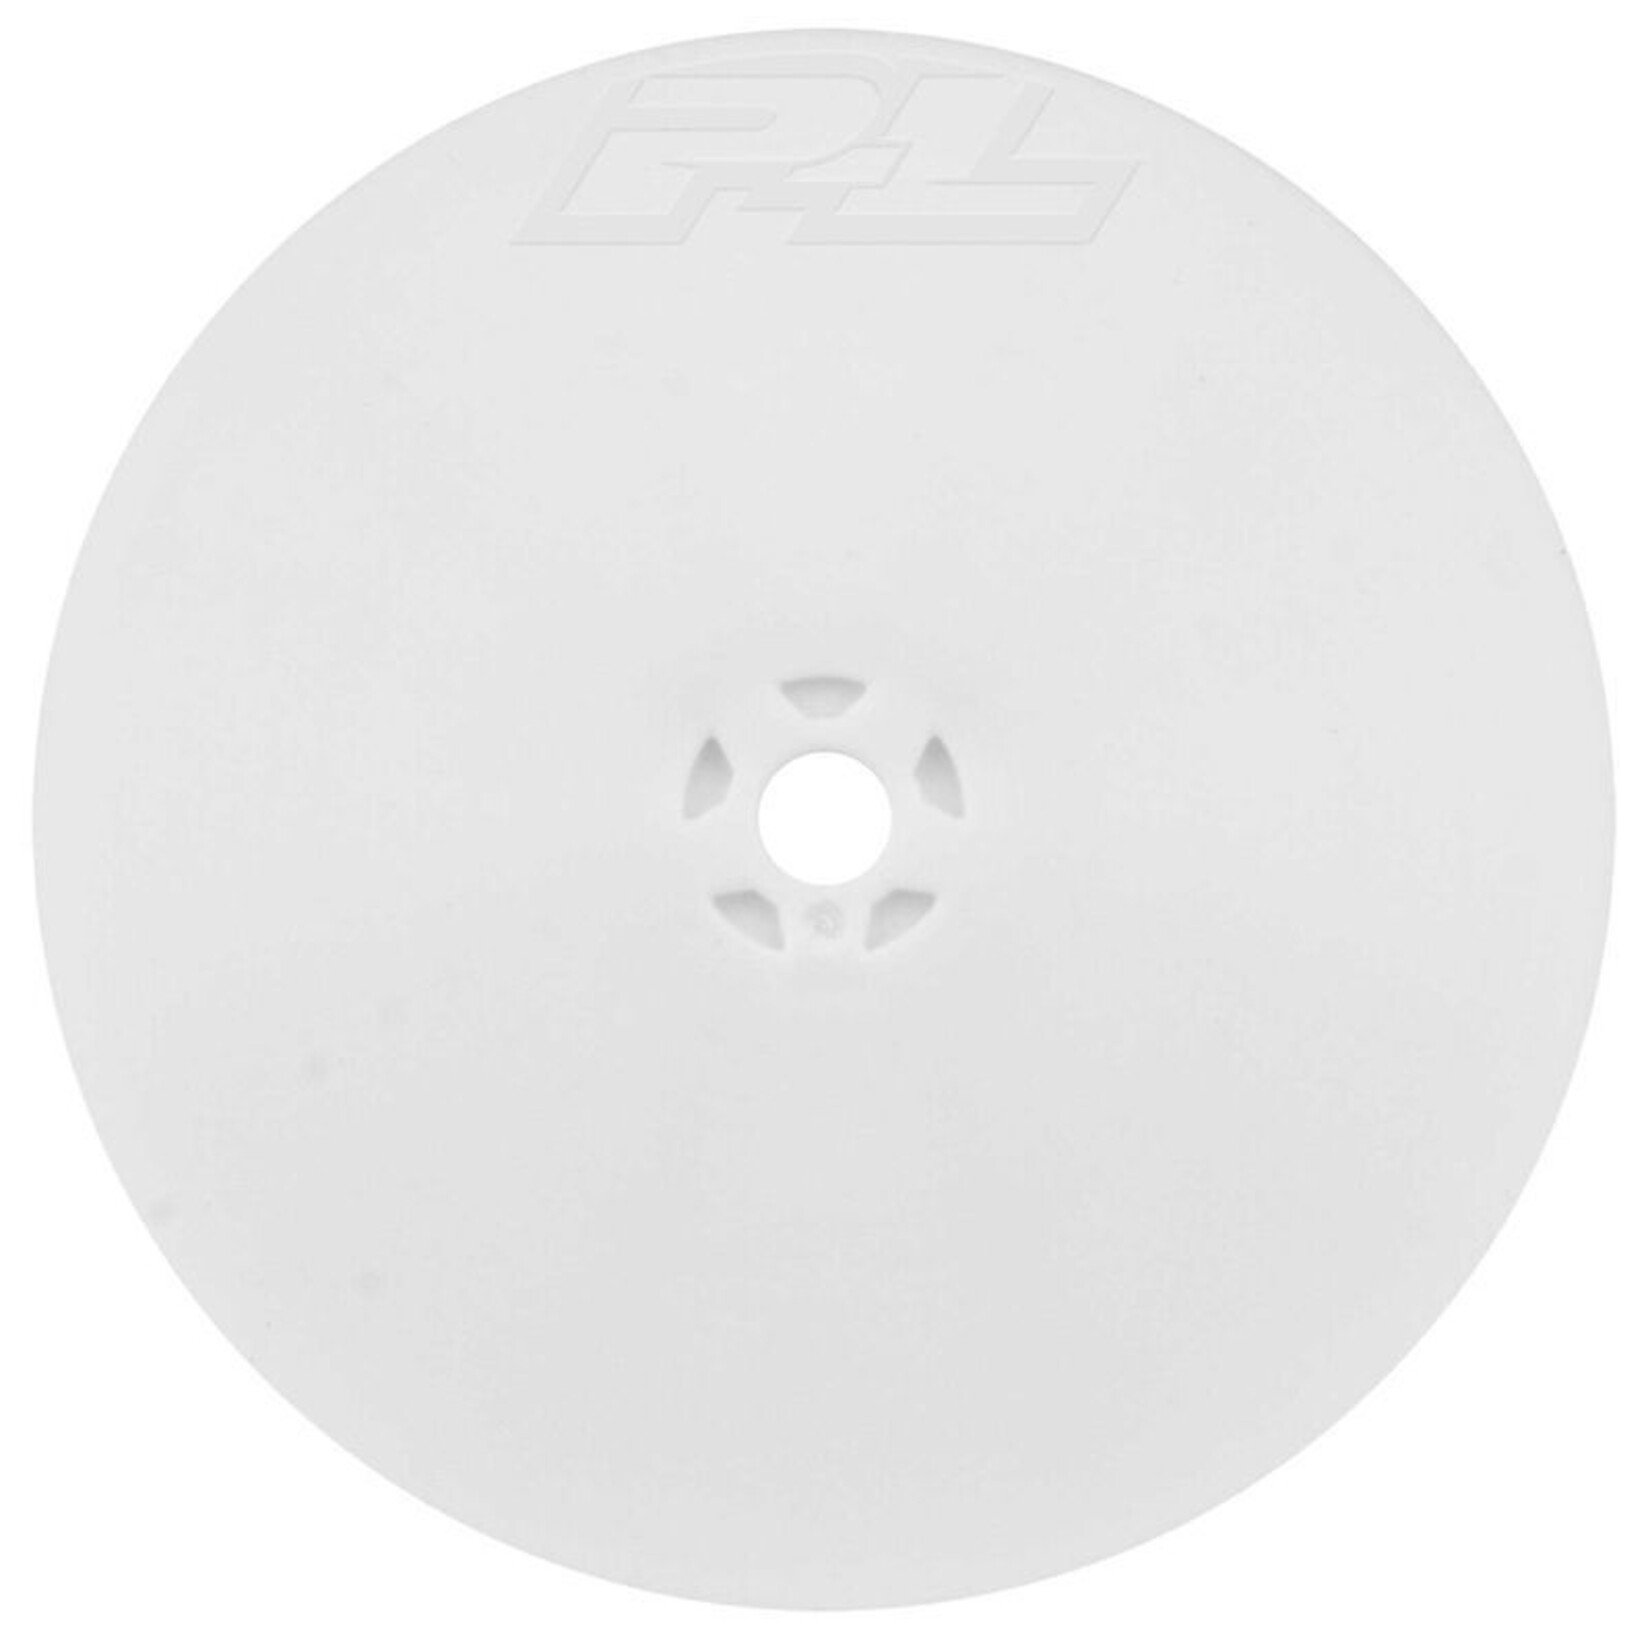 Pro-line Racing PRO276804 Pro-Line Velocity 4WD Front 2.2" 12mm Buggy Wheels (2) White: AE B74 ##